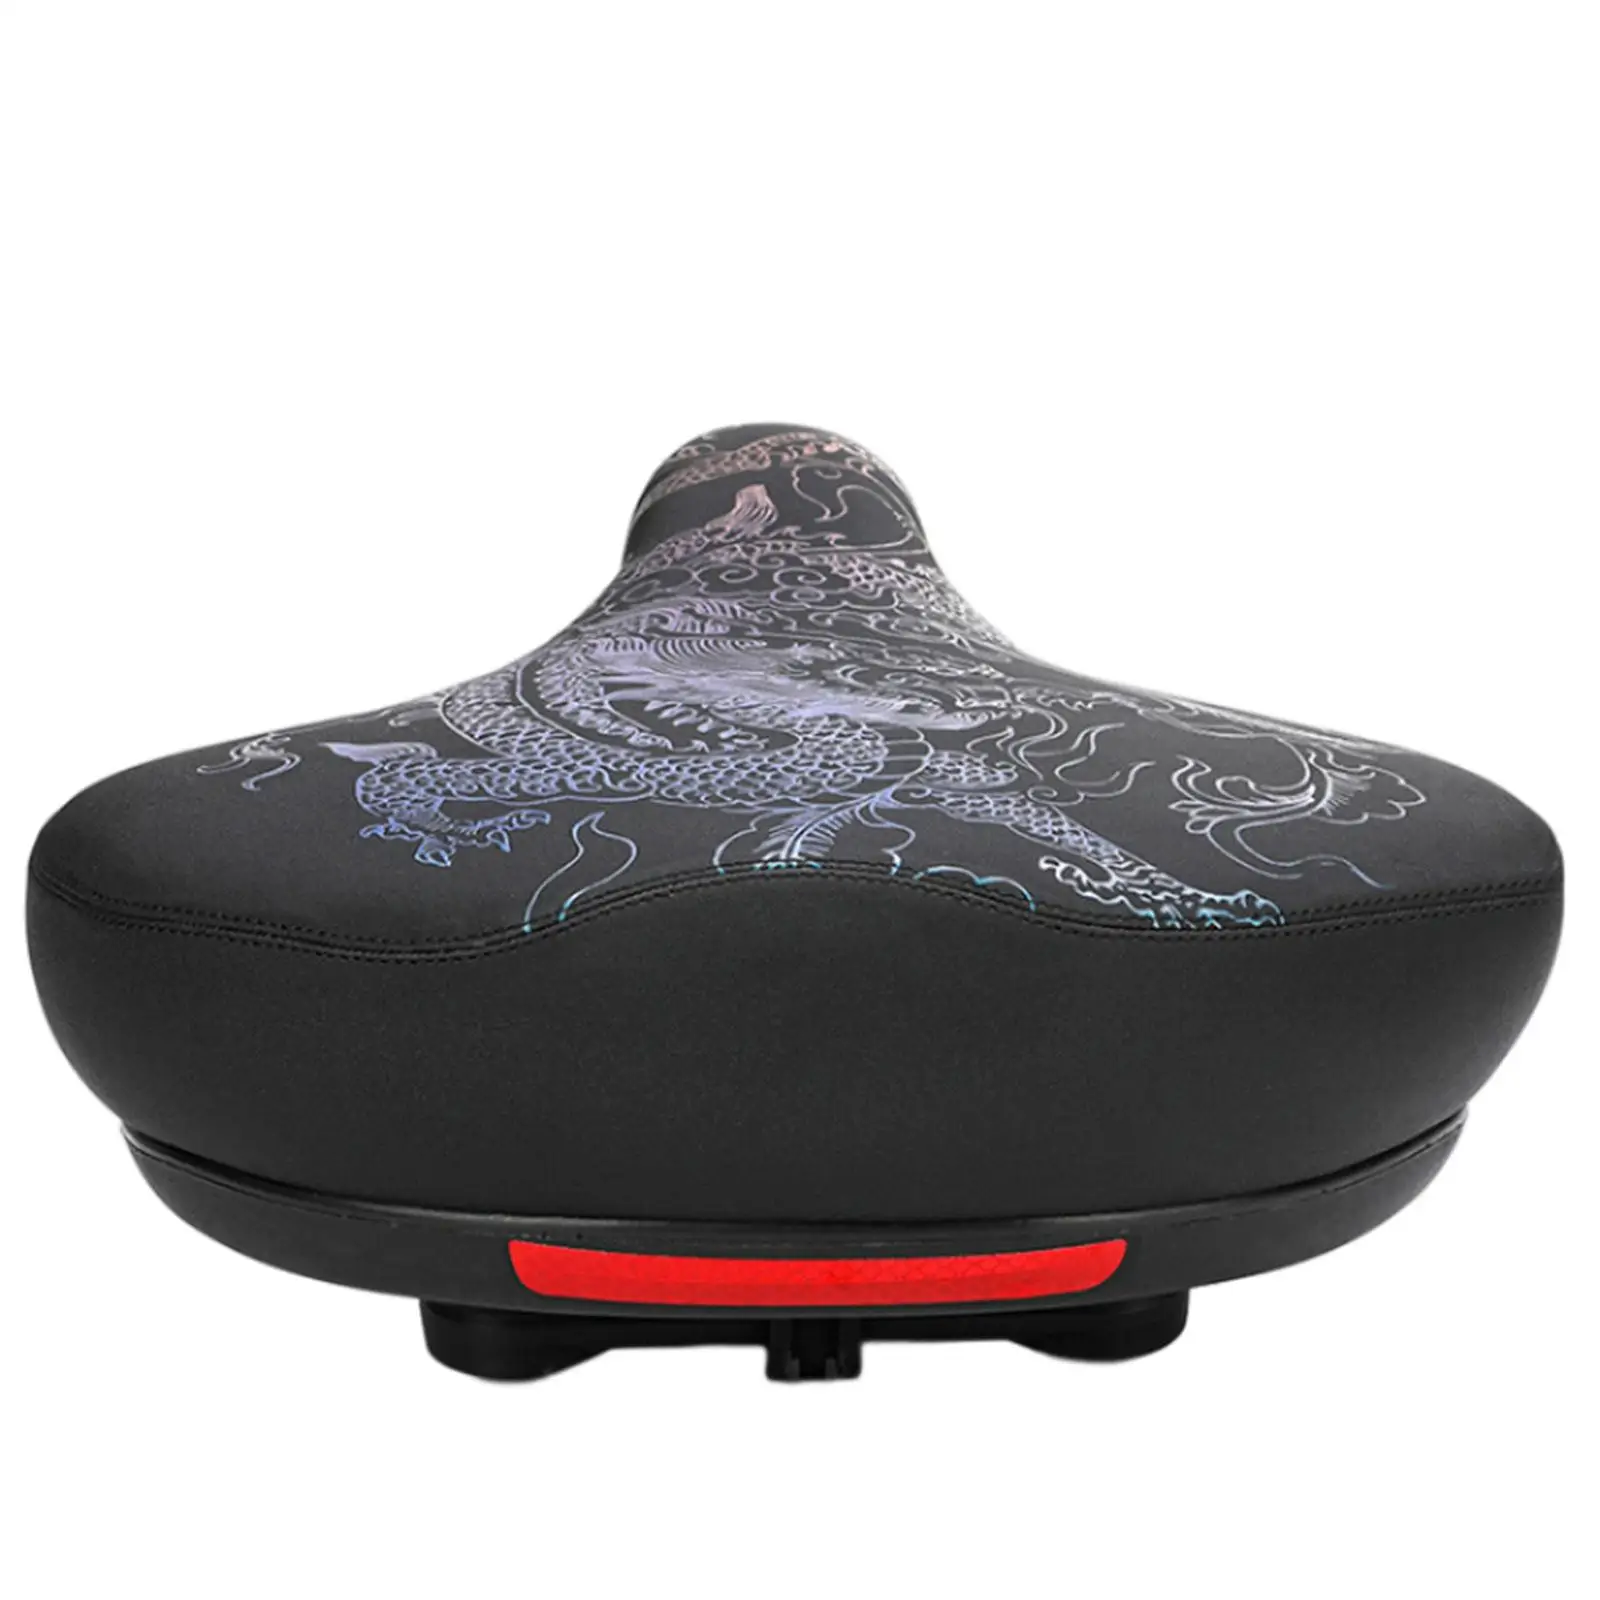 Dragon Pattern Bicycle Bike Saddle Cushion Accessories Universal Fit 2.6x13.8inch Anti Scratch for Indoor Stationary